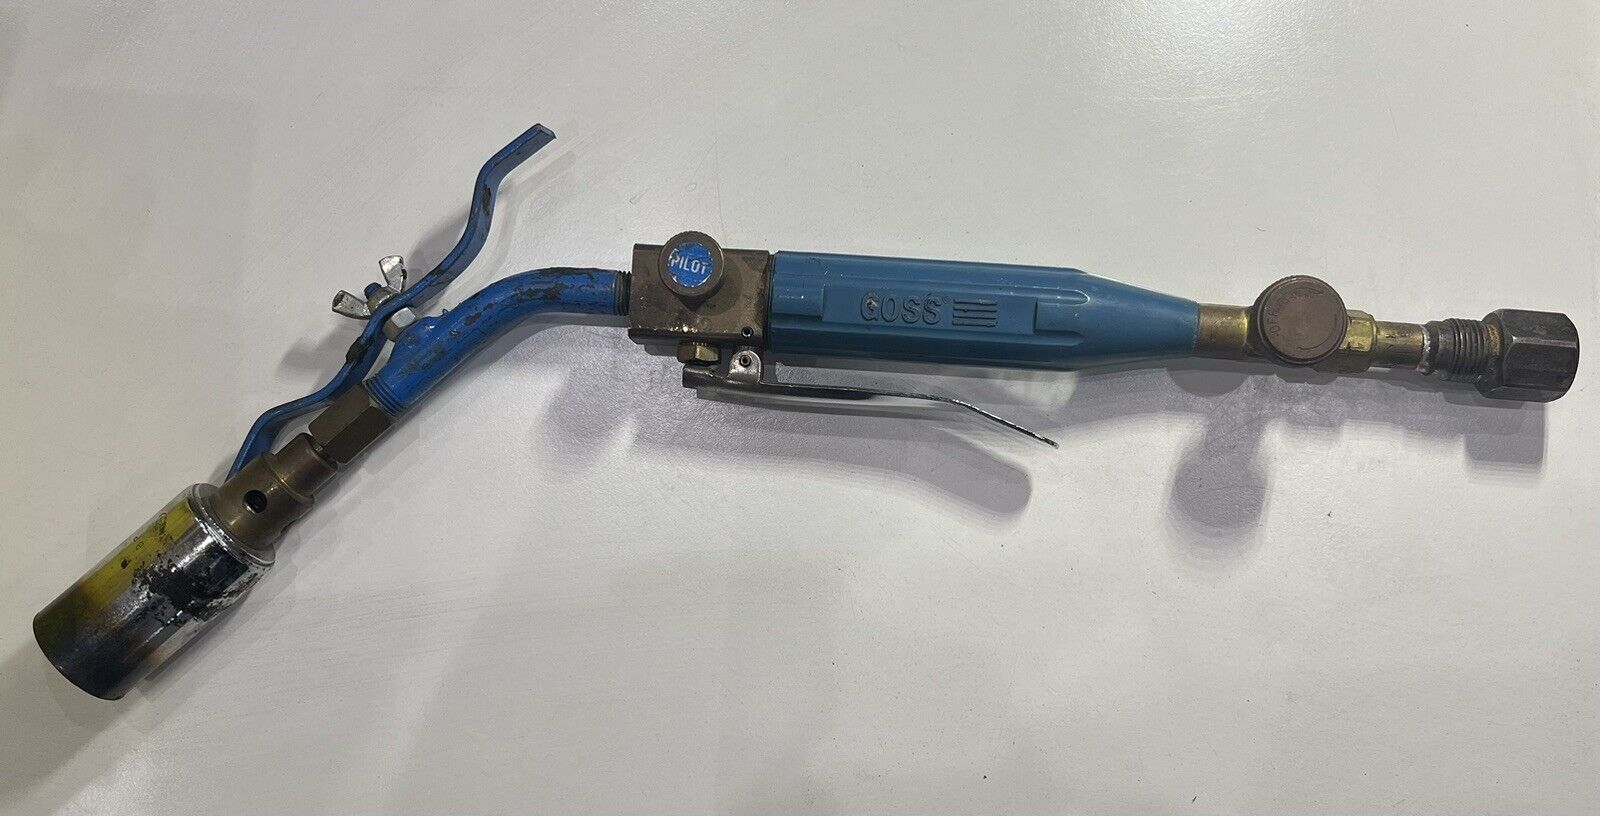 GOSS Vintage Air Propane Blow Torch Equipment Blue Snap In Style Made in USA